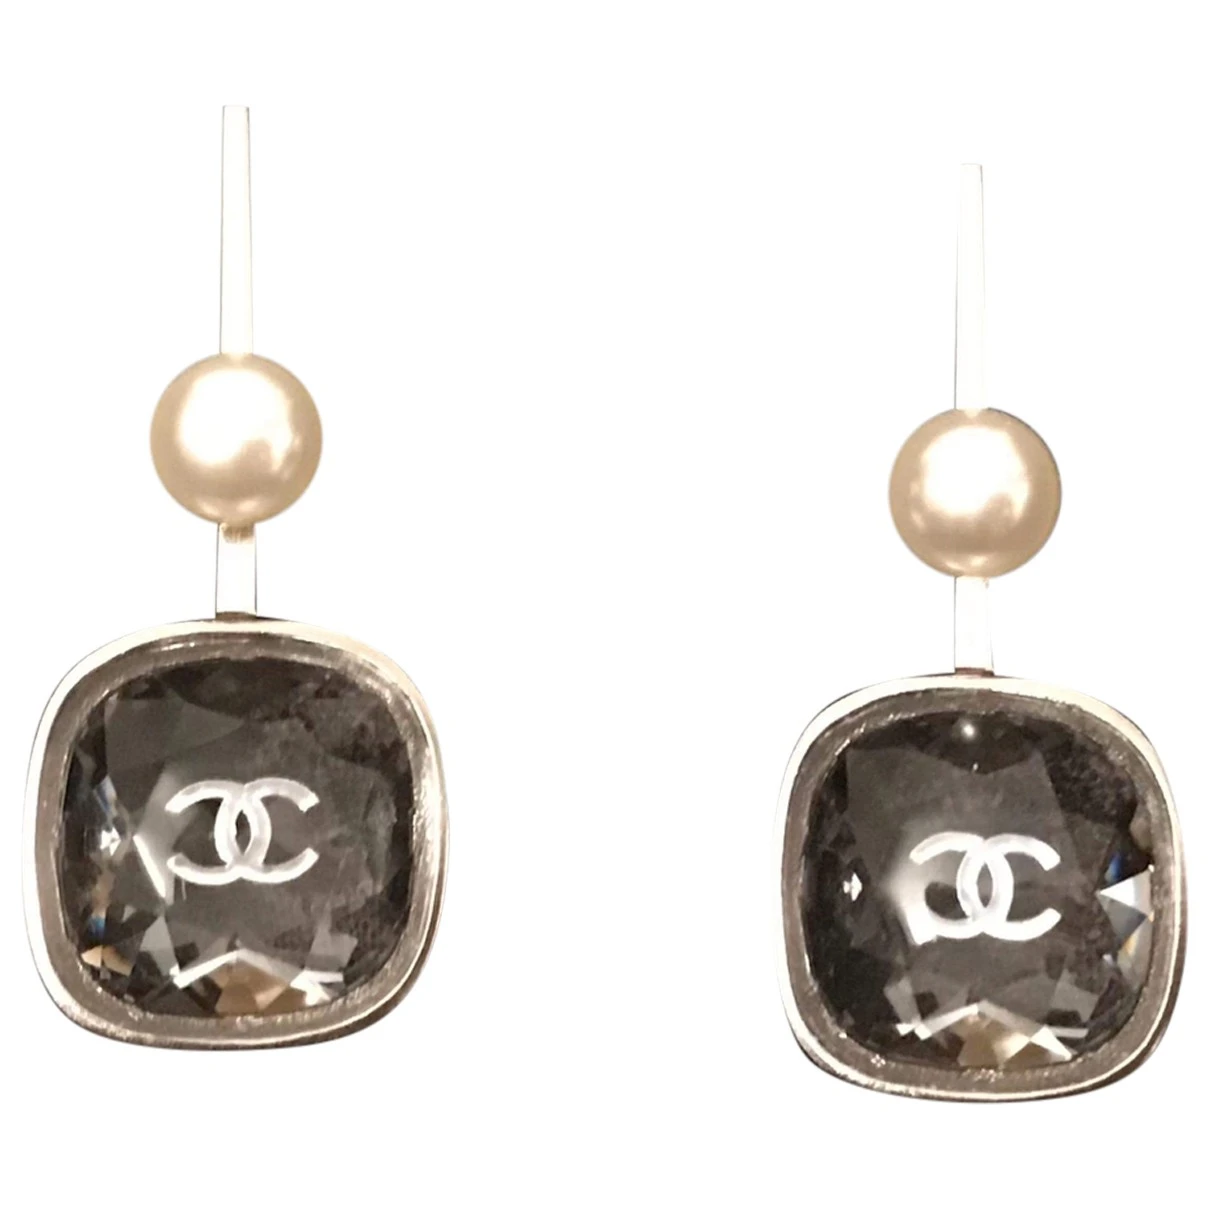 jewellery Chanel earrings CC for Female Pearl. Used condition